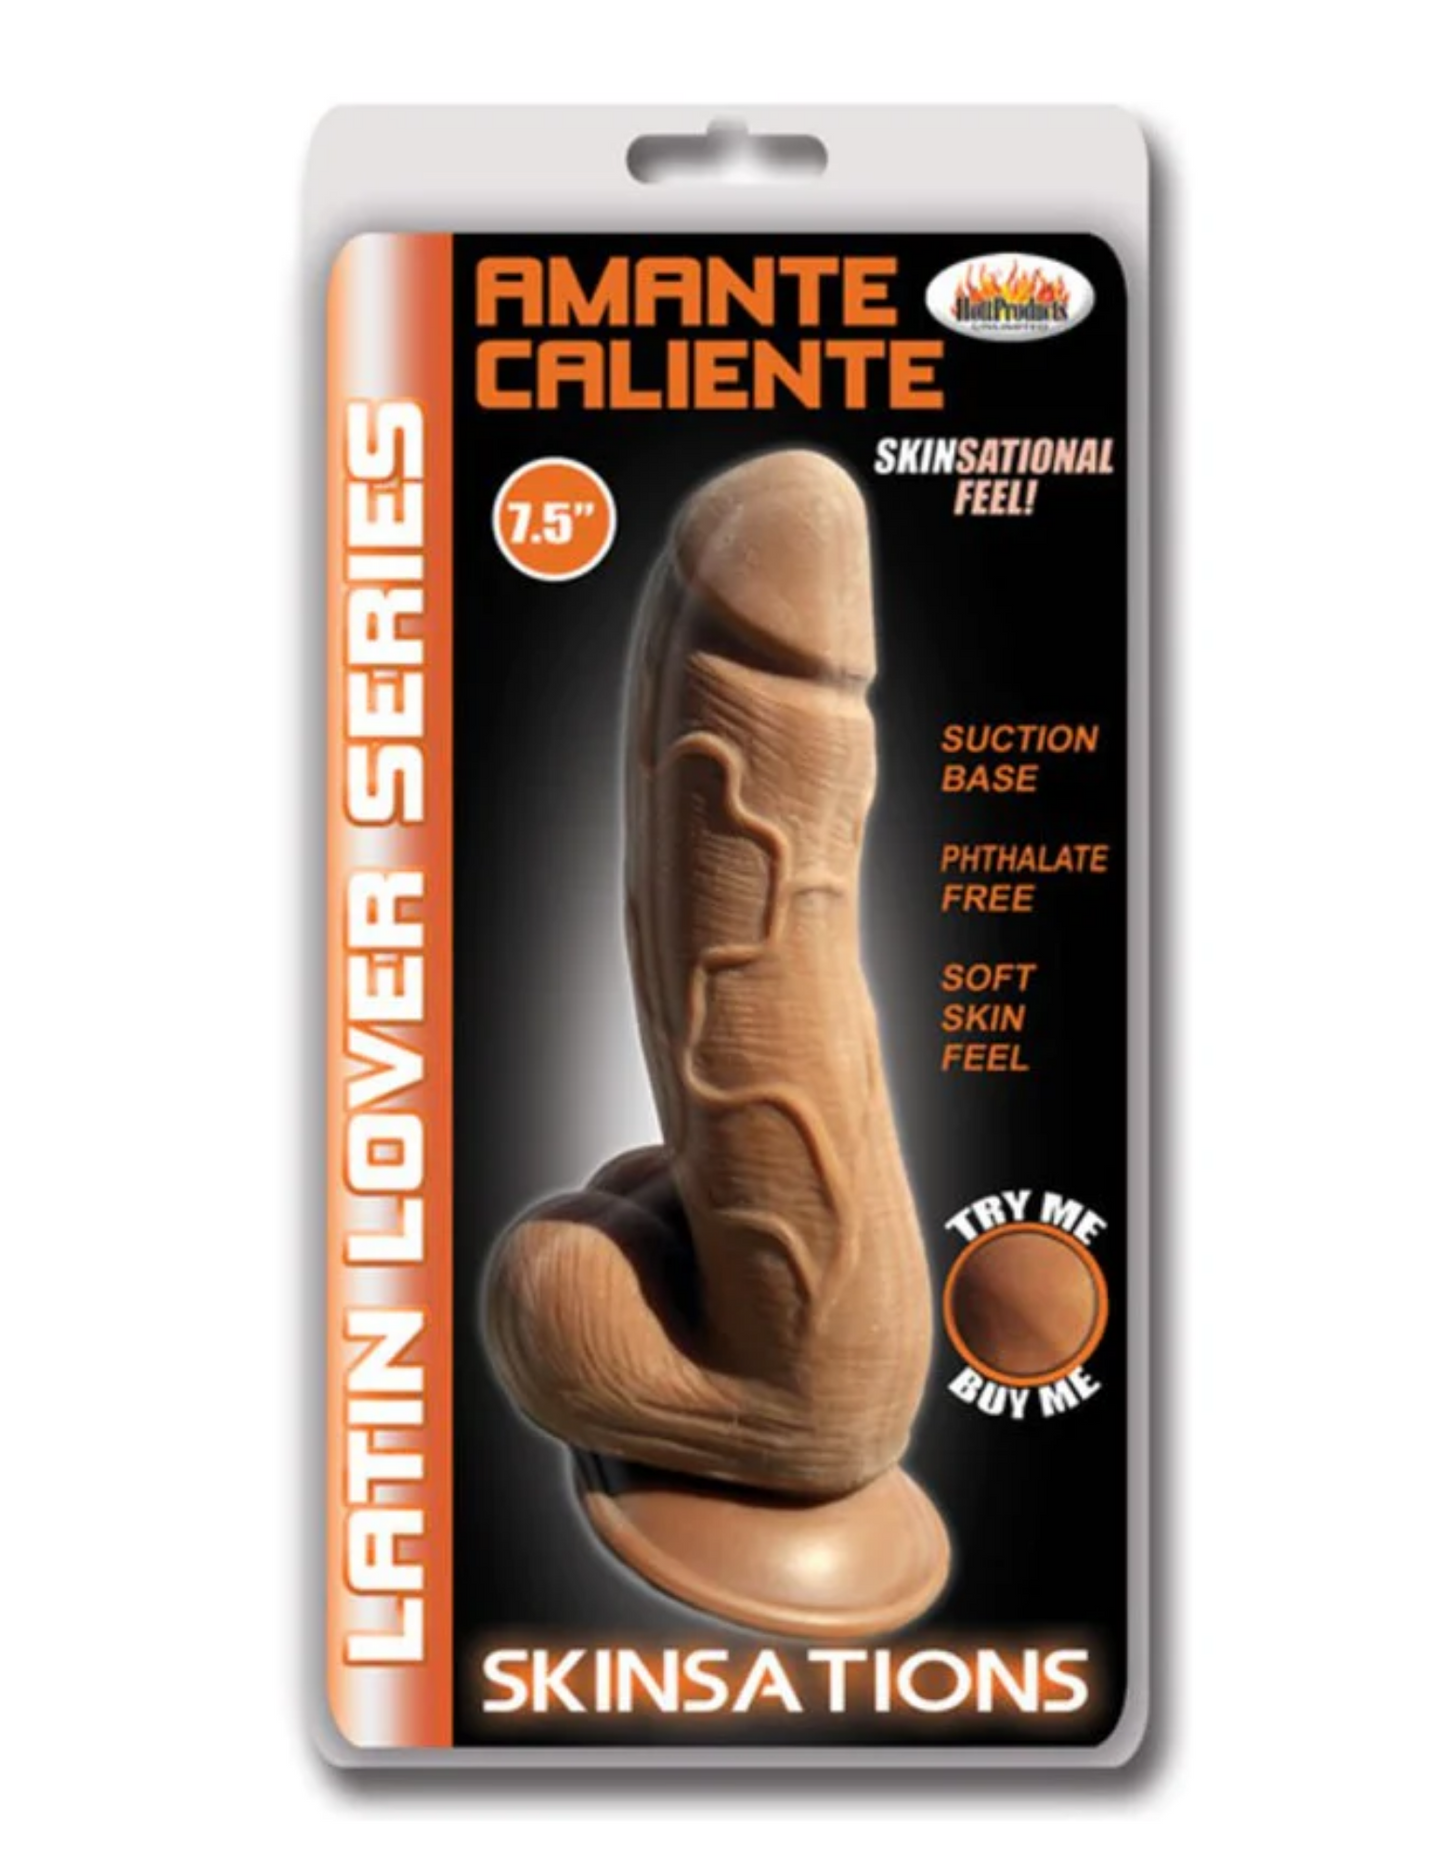 Photo of the dildo and package for Skinsations Amante Caliente Dildo from Hott Products